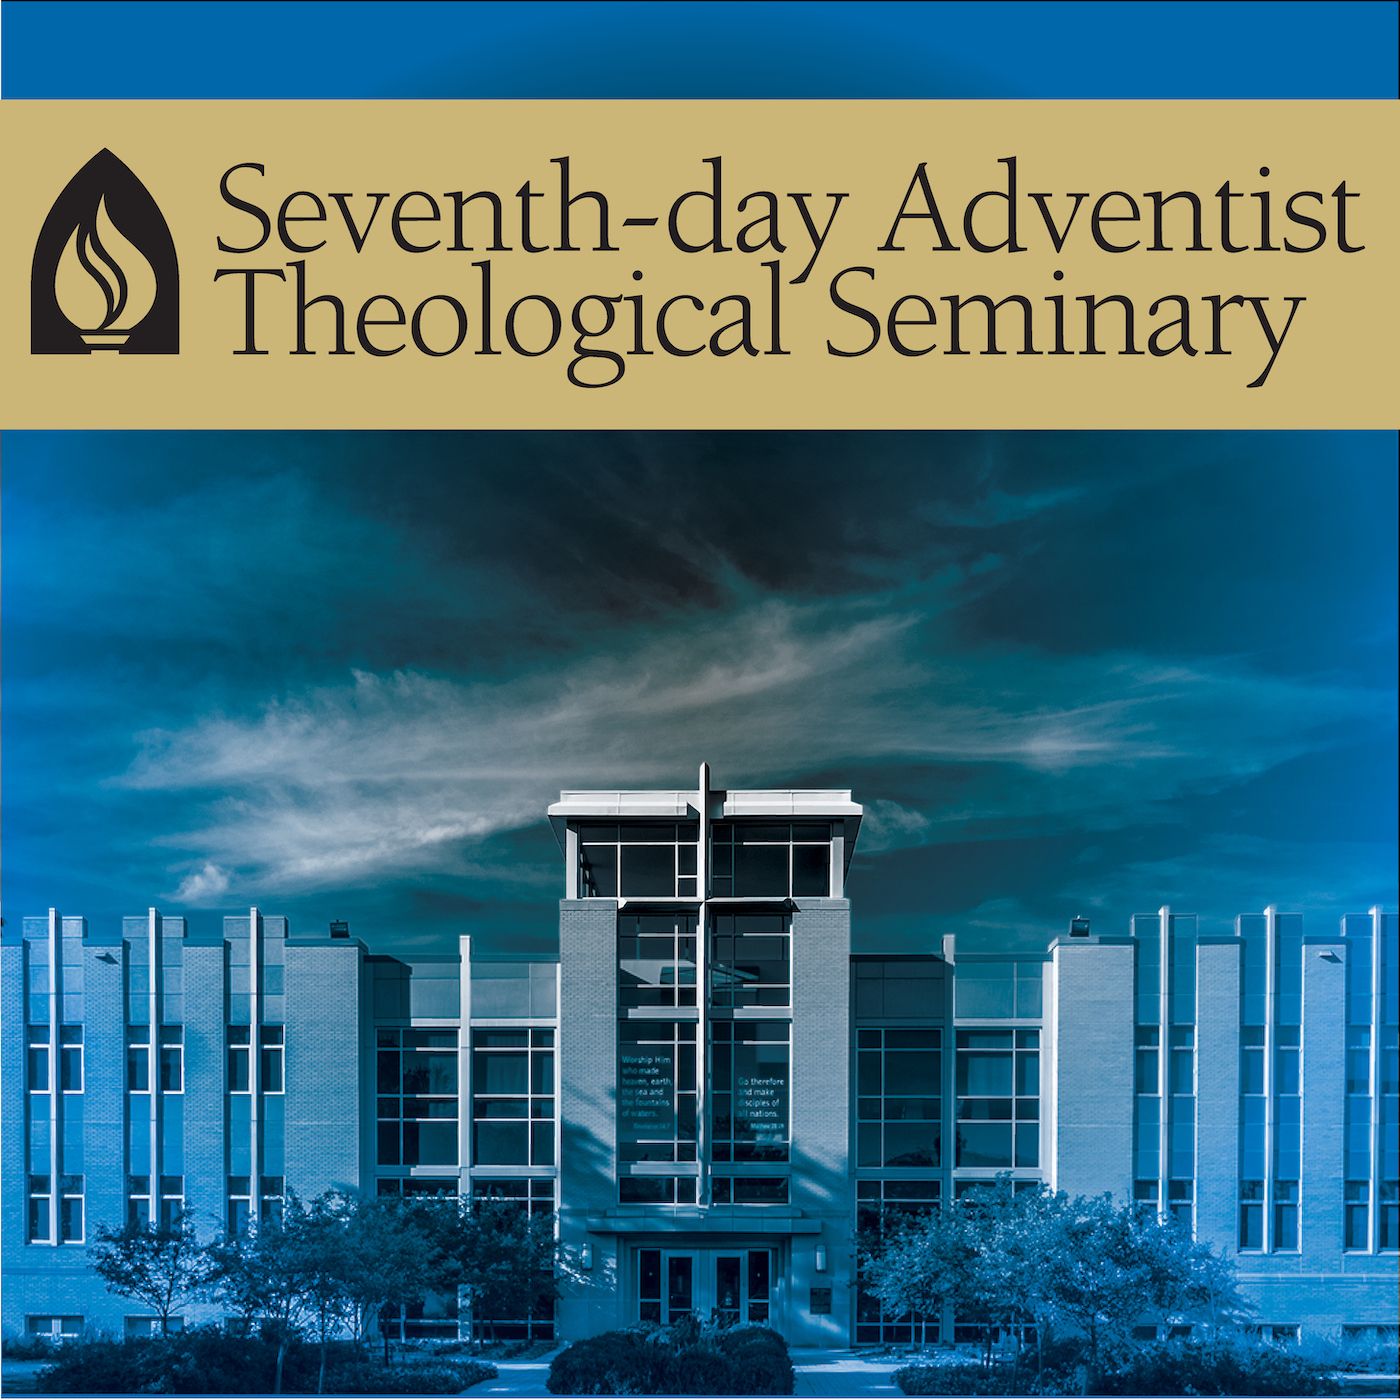 Seventh-day Adventist Theological Seminary